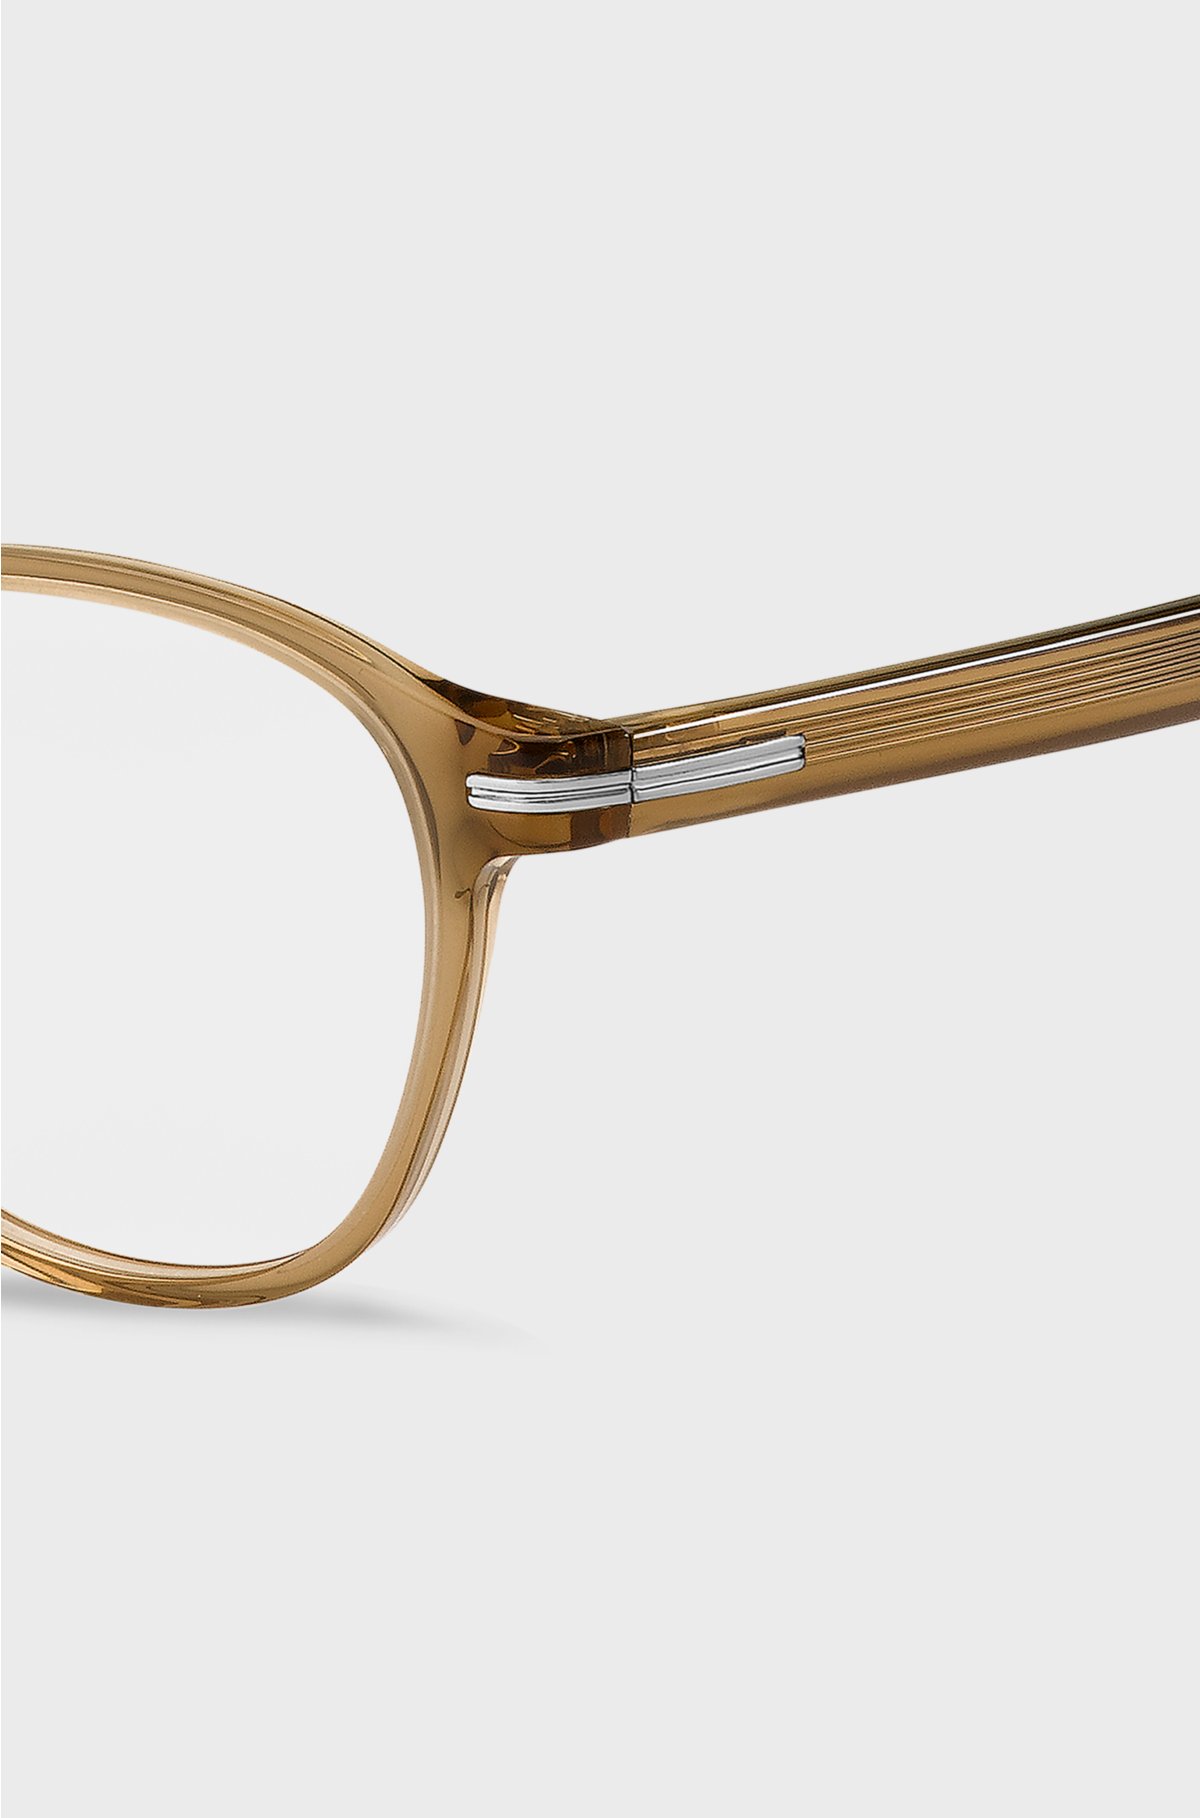 Brown-acetate optical frames with signature silver-tone detail, Light Brown